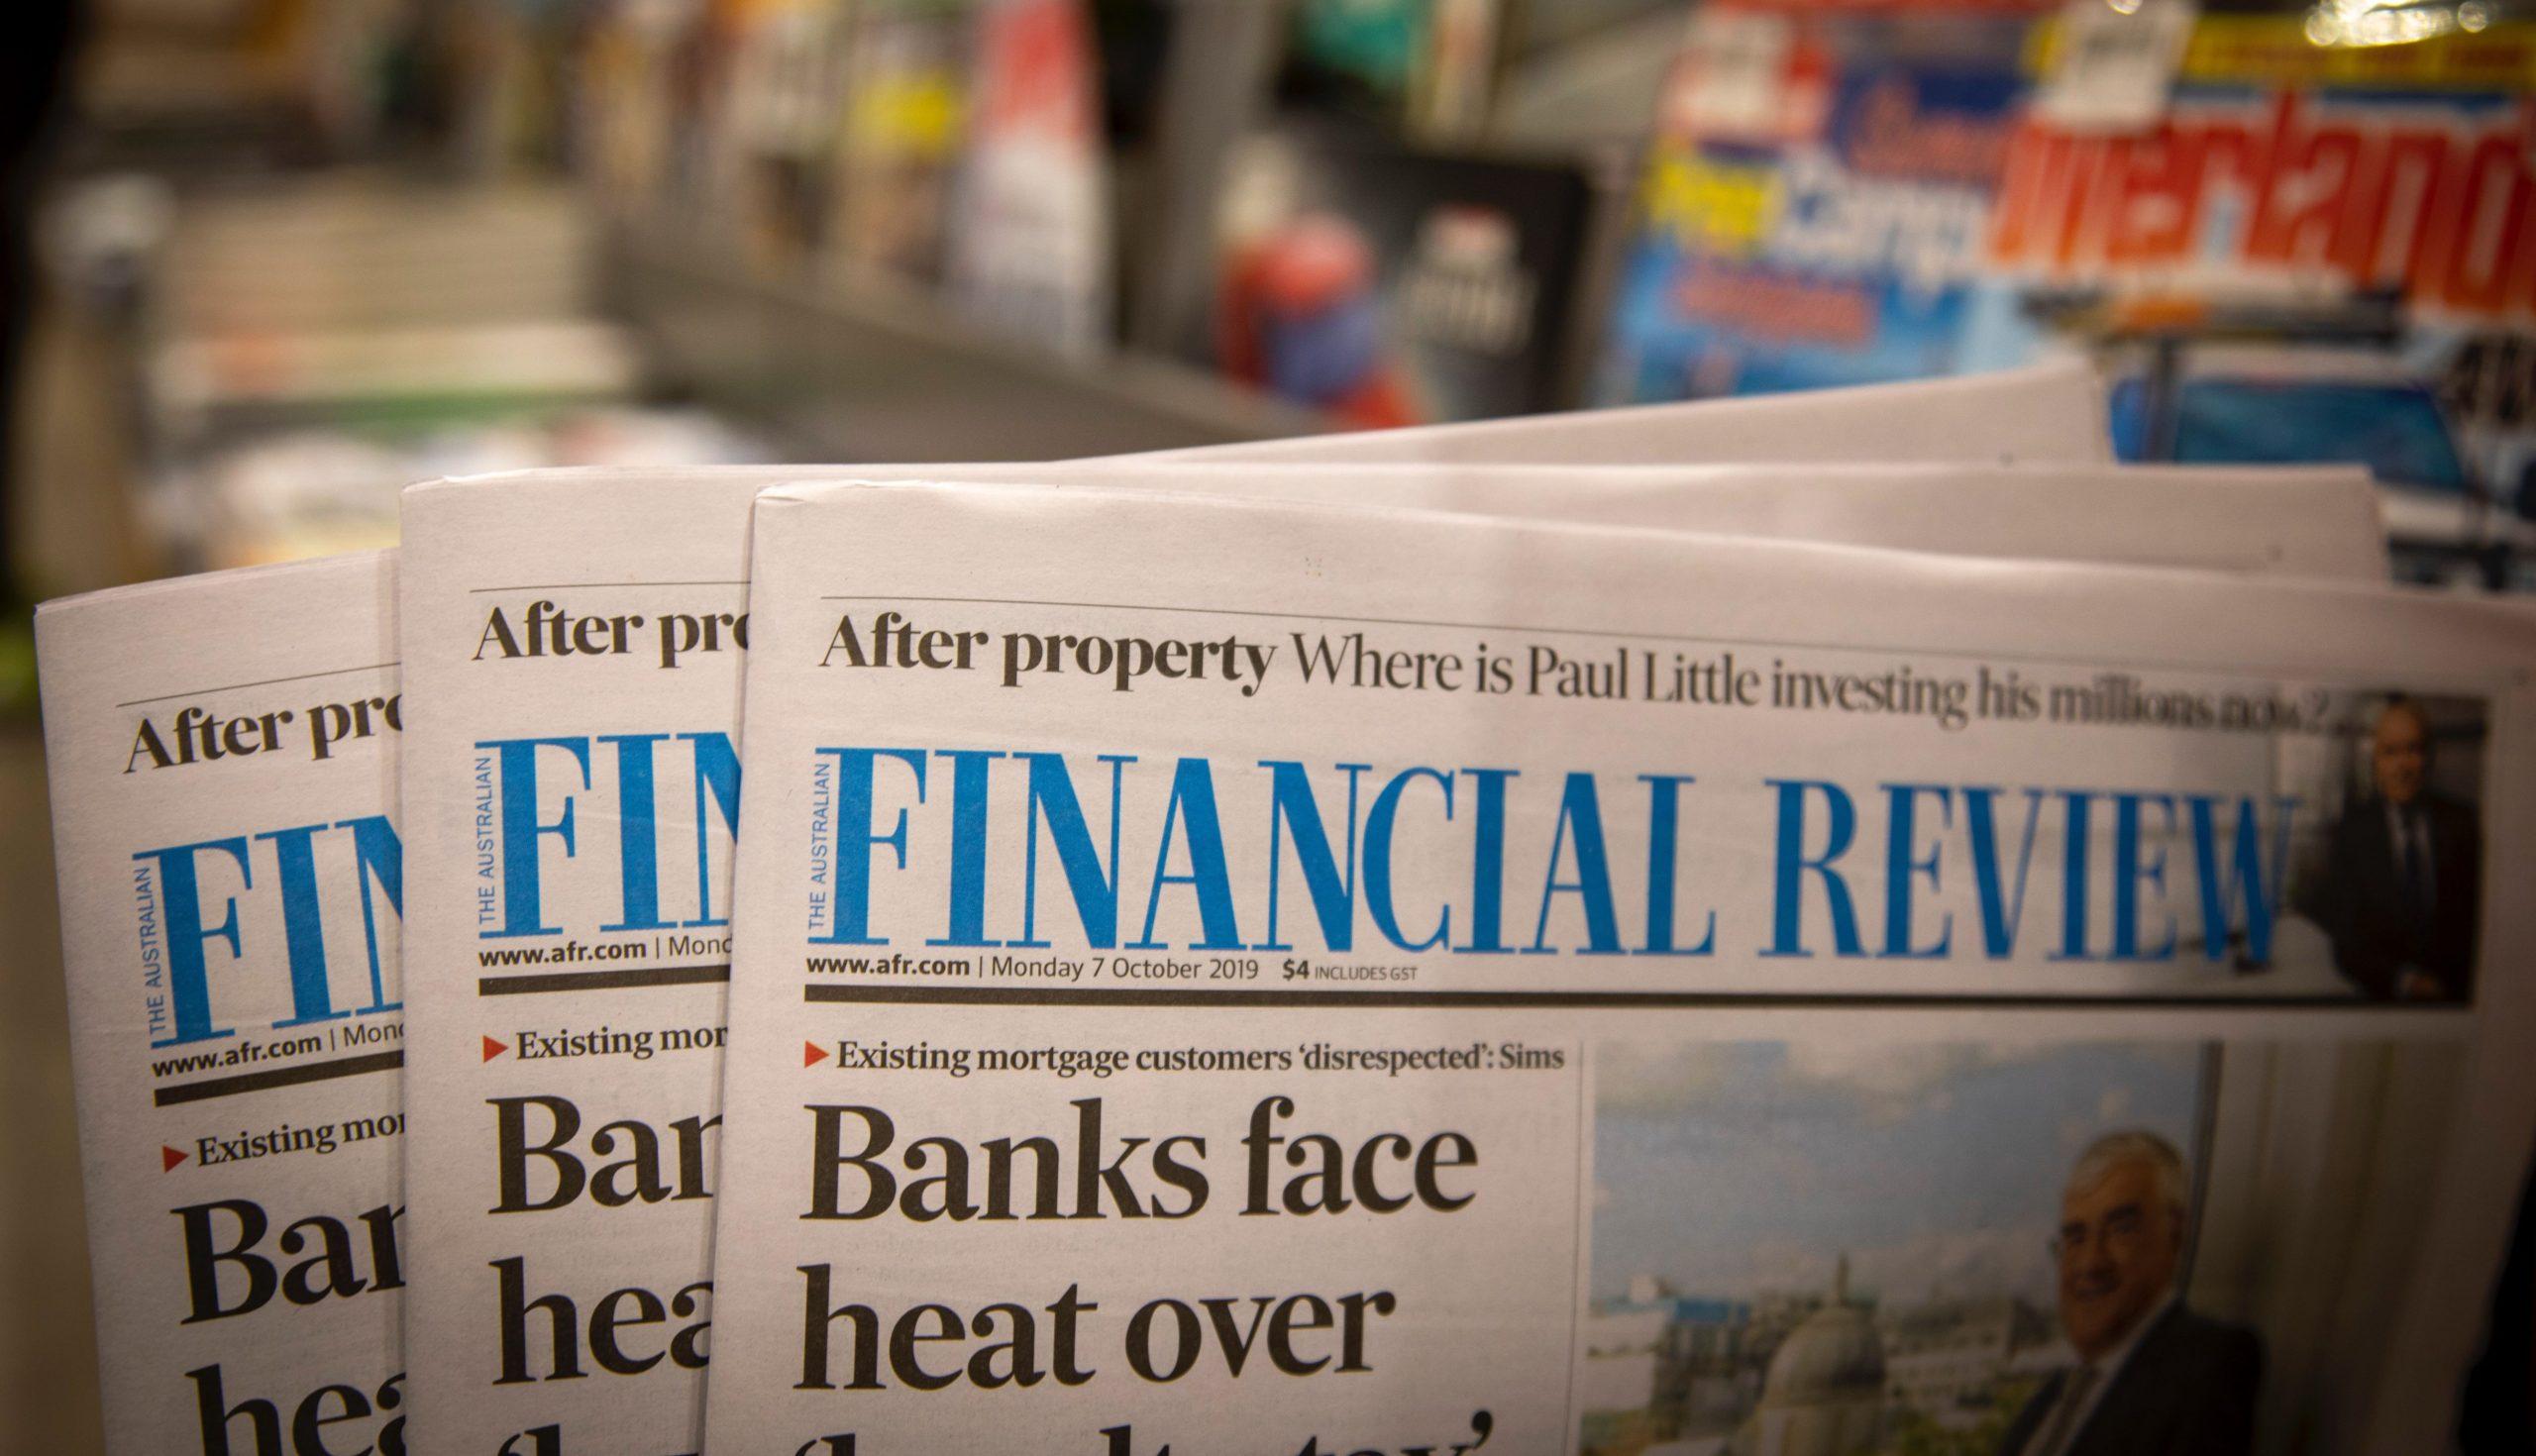 Copies of the Financial Review up close.